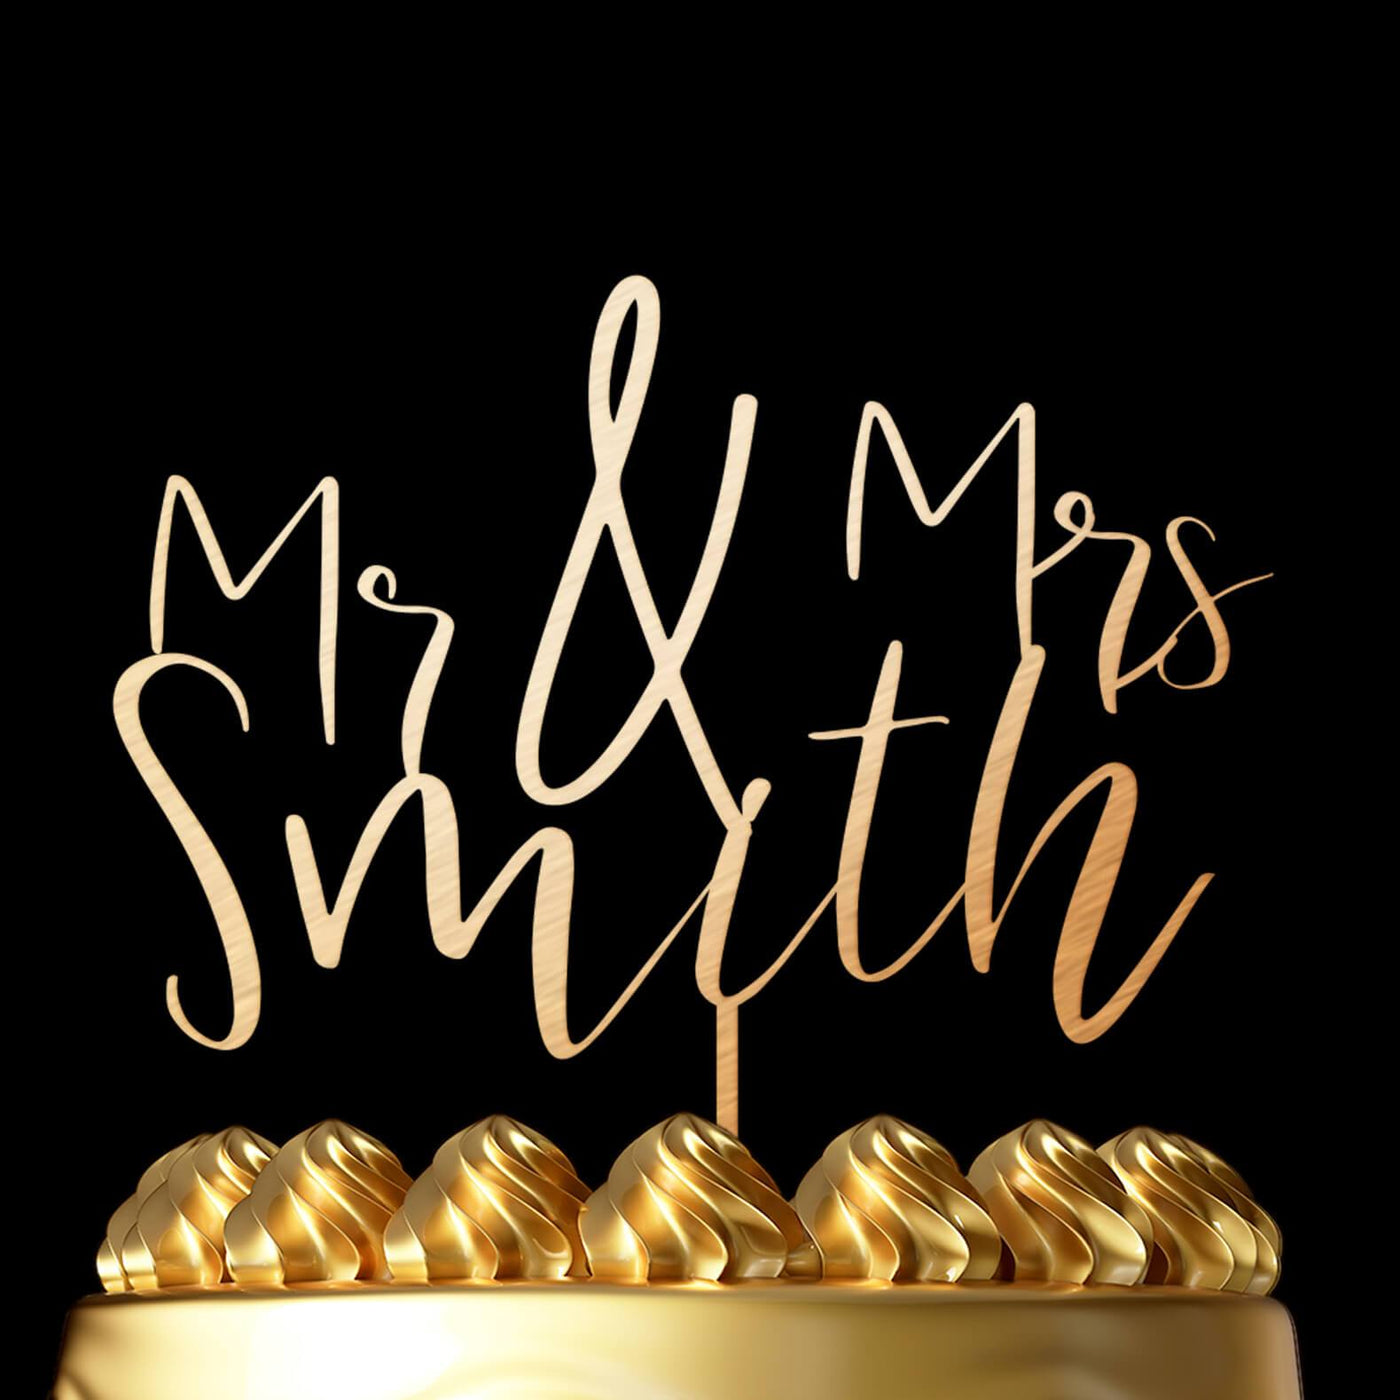 Create Your Perfect Wedding Cake - Personalized Toppers with Surname and Date